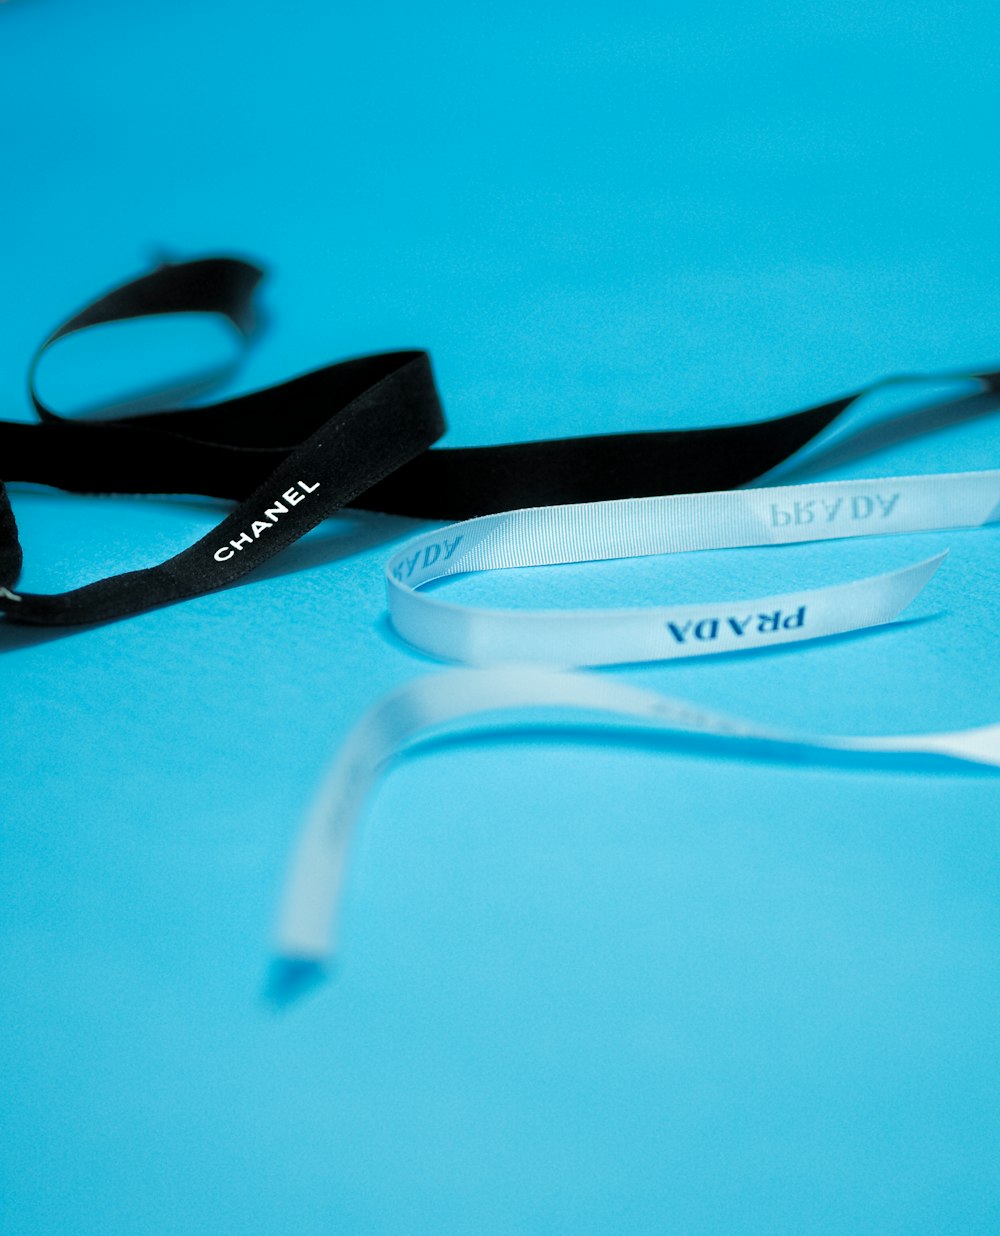 black and white sunglasses on blue surface